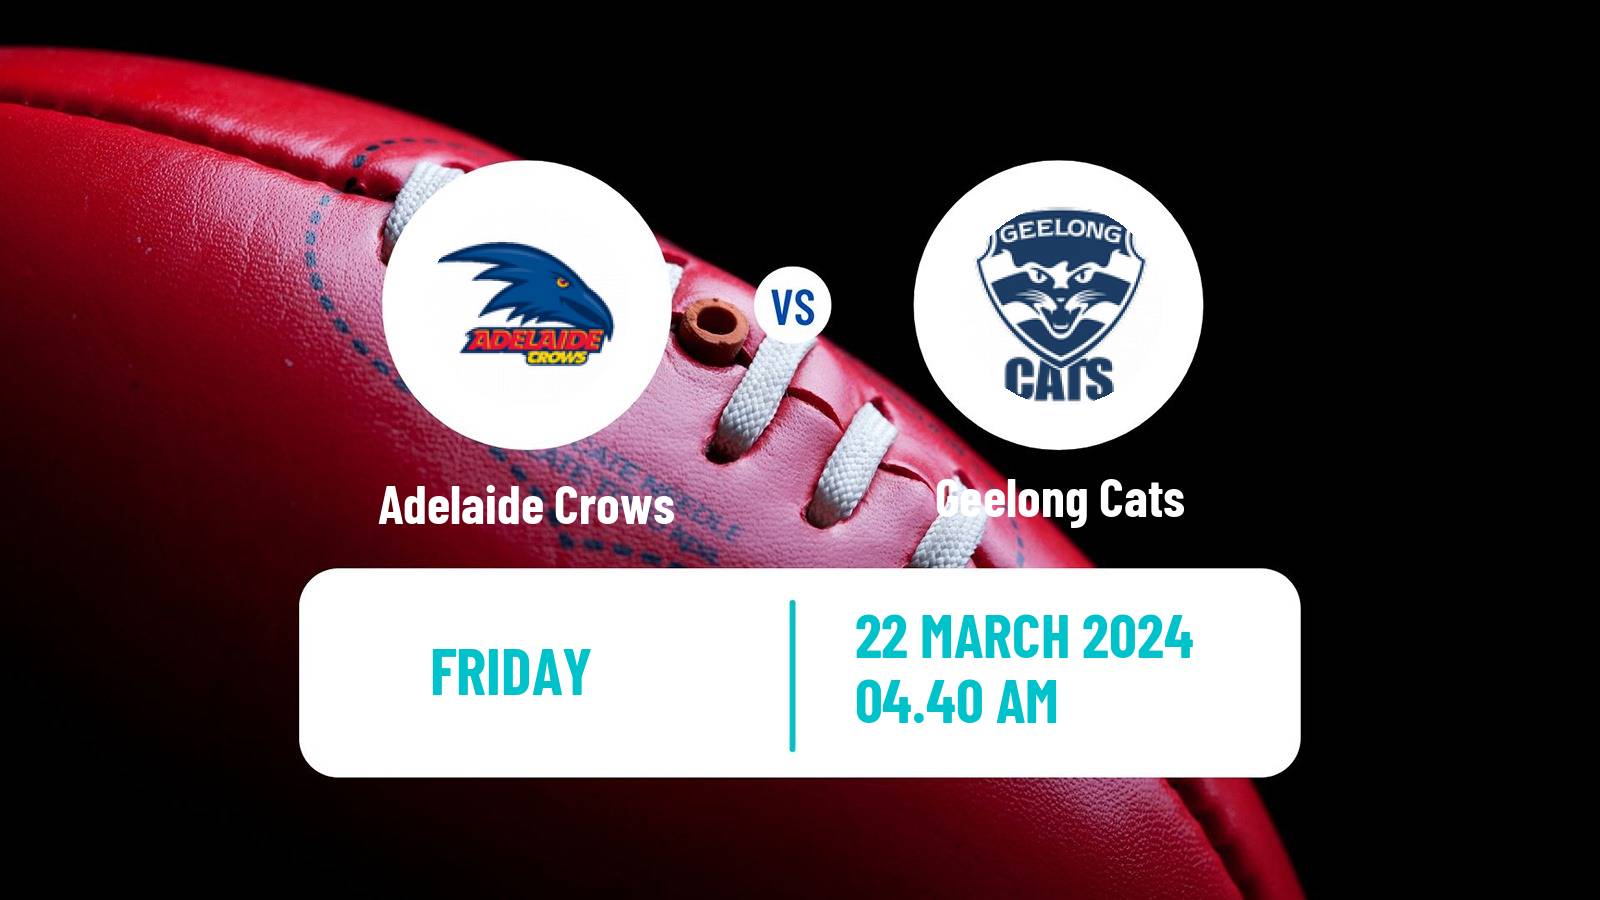 Aussie rules AFL Adelaide Crows - Geelong Cats